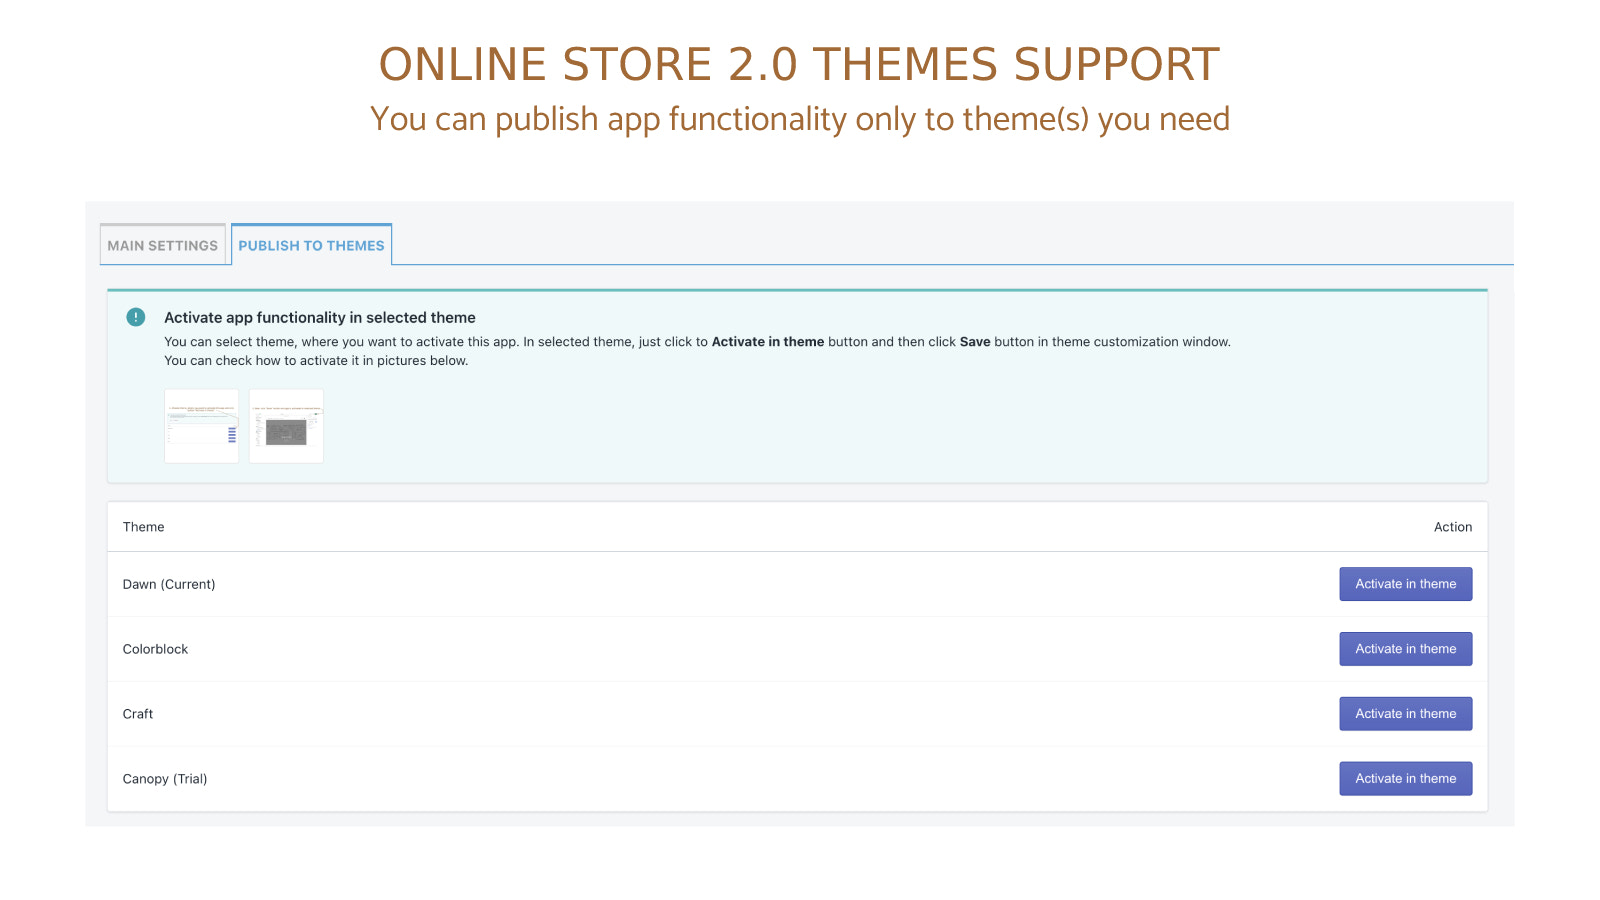 App is compatible with ONLINE STORE 2.0 themes